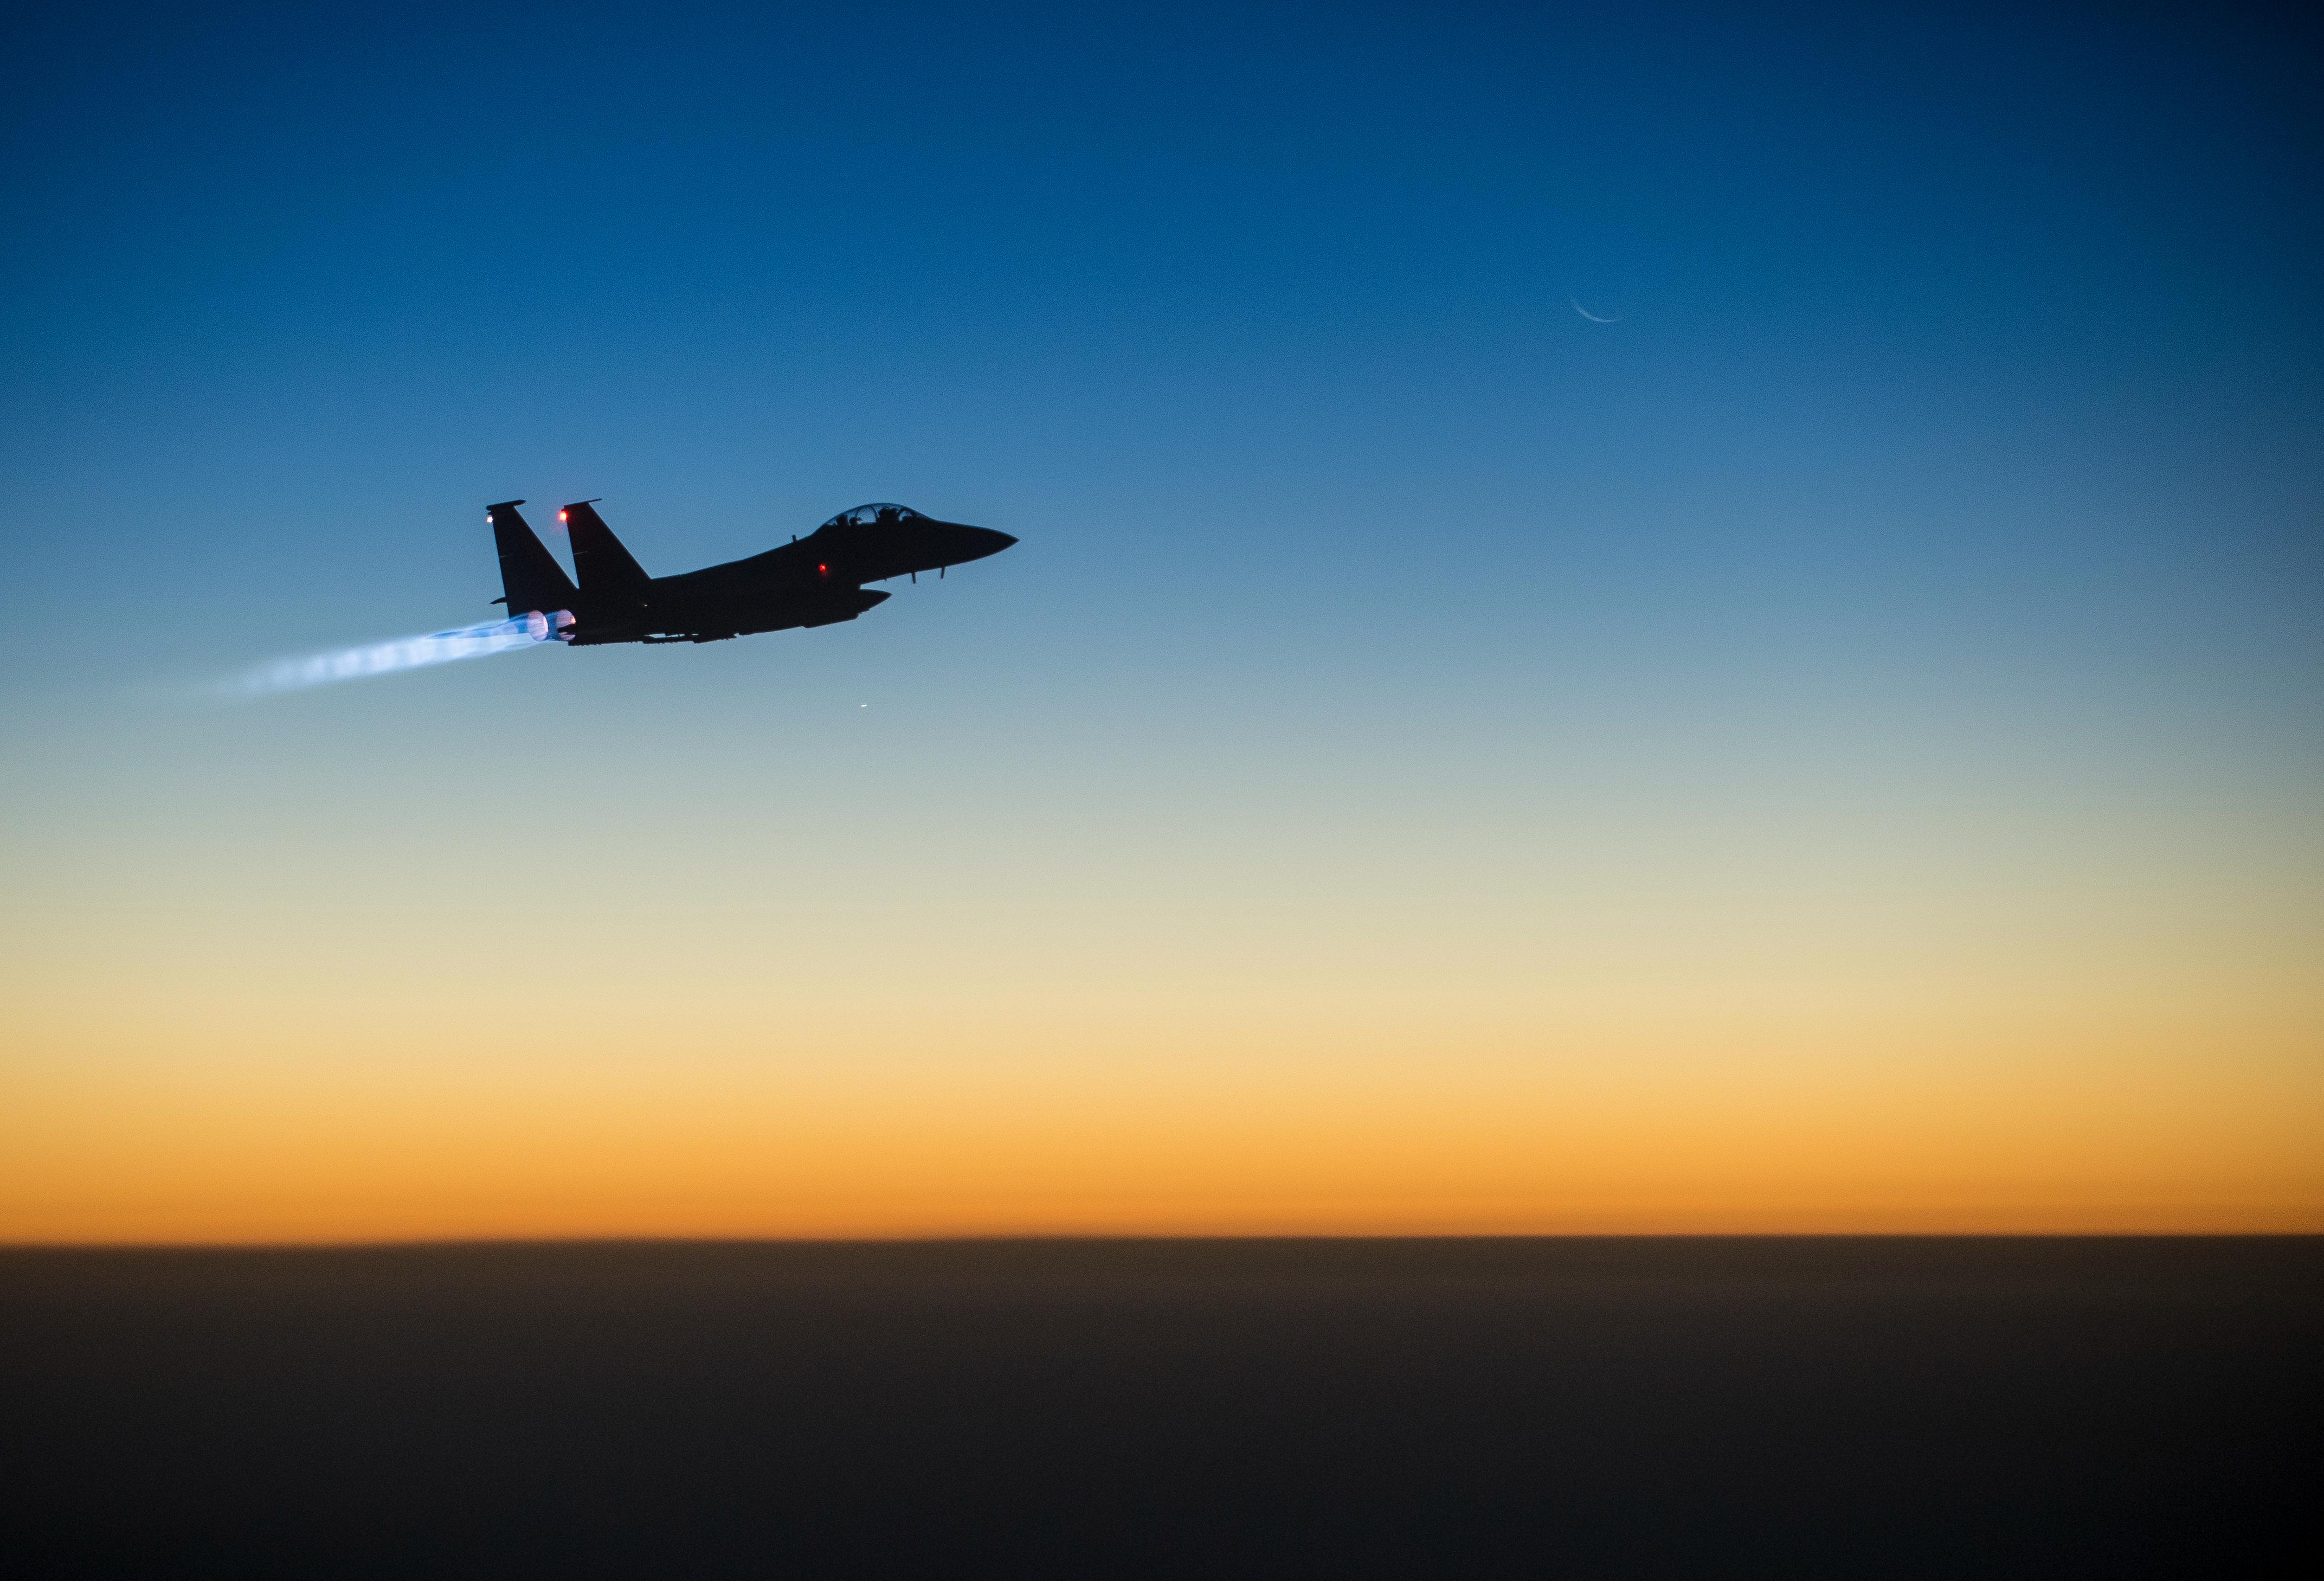 A U.S. Air Force F-15E Strike Eagle flies over northern Iraq early in the morning of Sept. 23, 2014, after conducting airstrikes in Syria. This F-15 was a part of a large coalition strike package that was the first to strike ISIL targets in Syria. (U.S. Air Force photo by Senior Airman Matthew Bruch/Released)